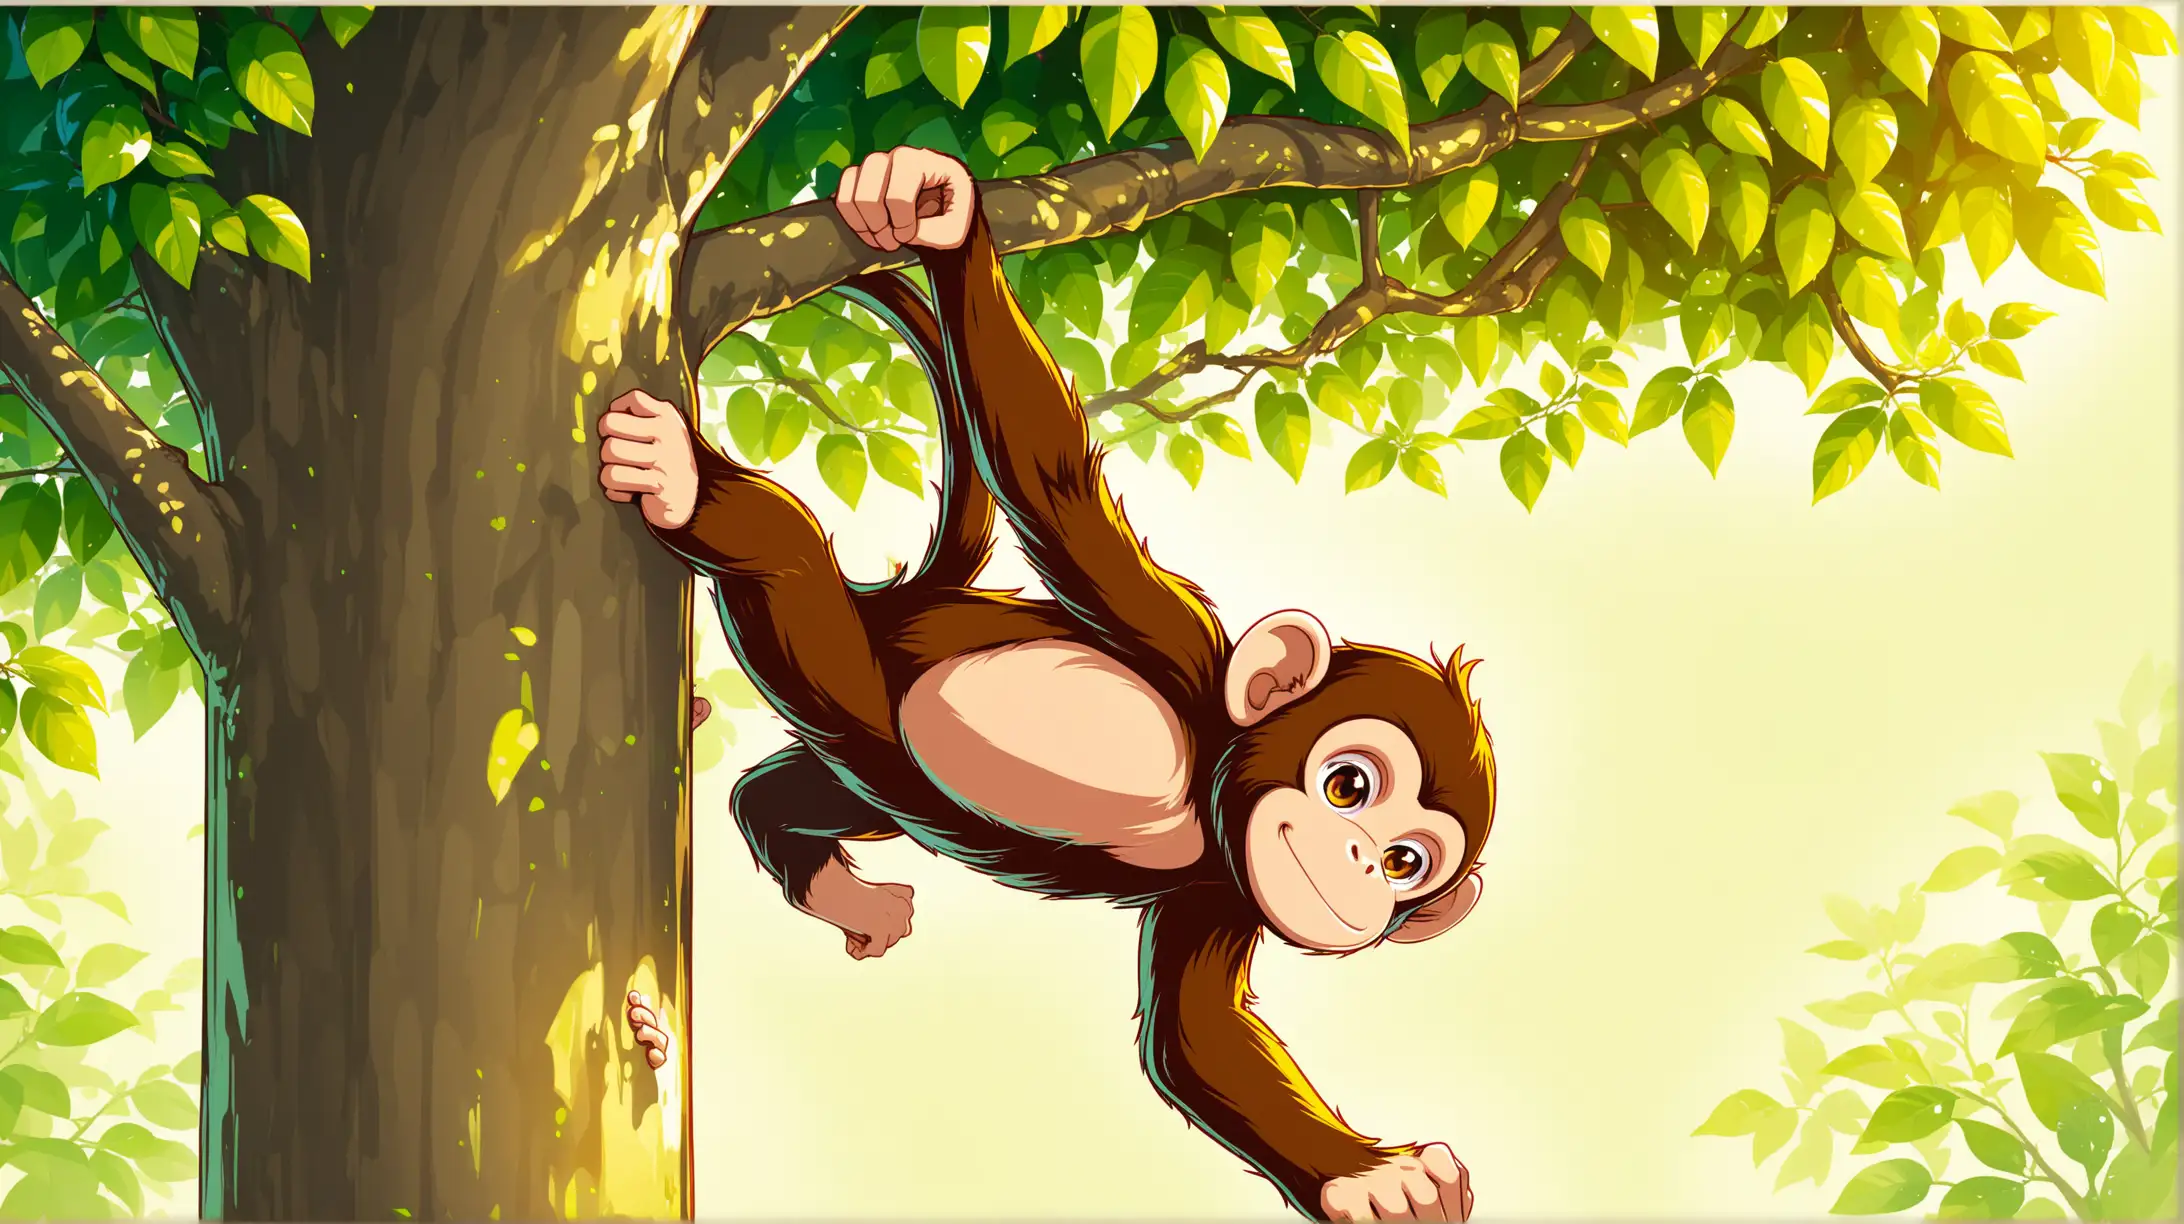 Curious Monkey Climbing Tree in the Wild